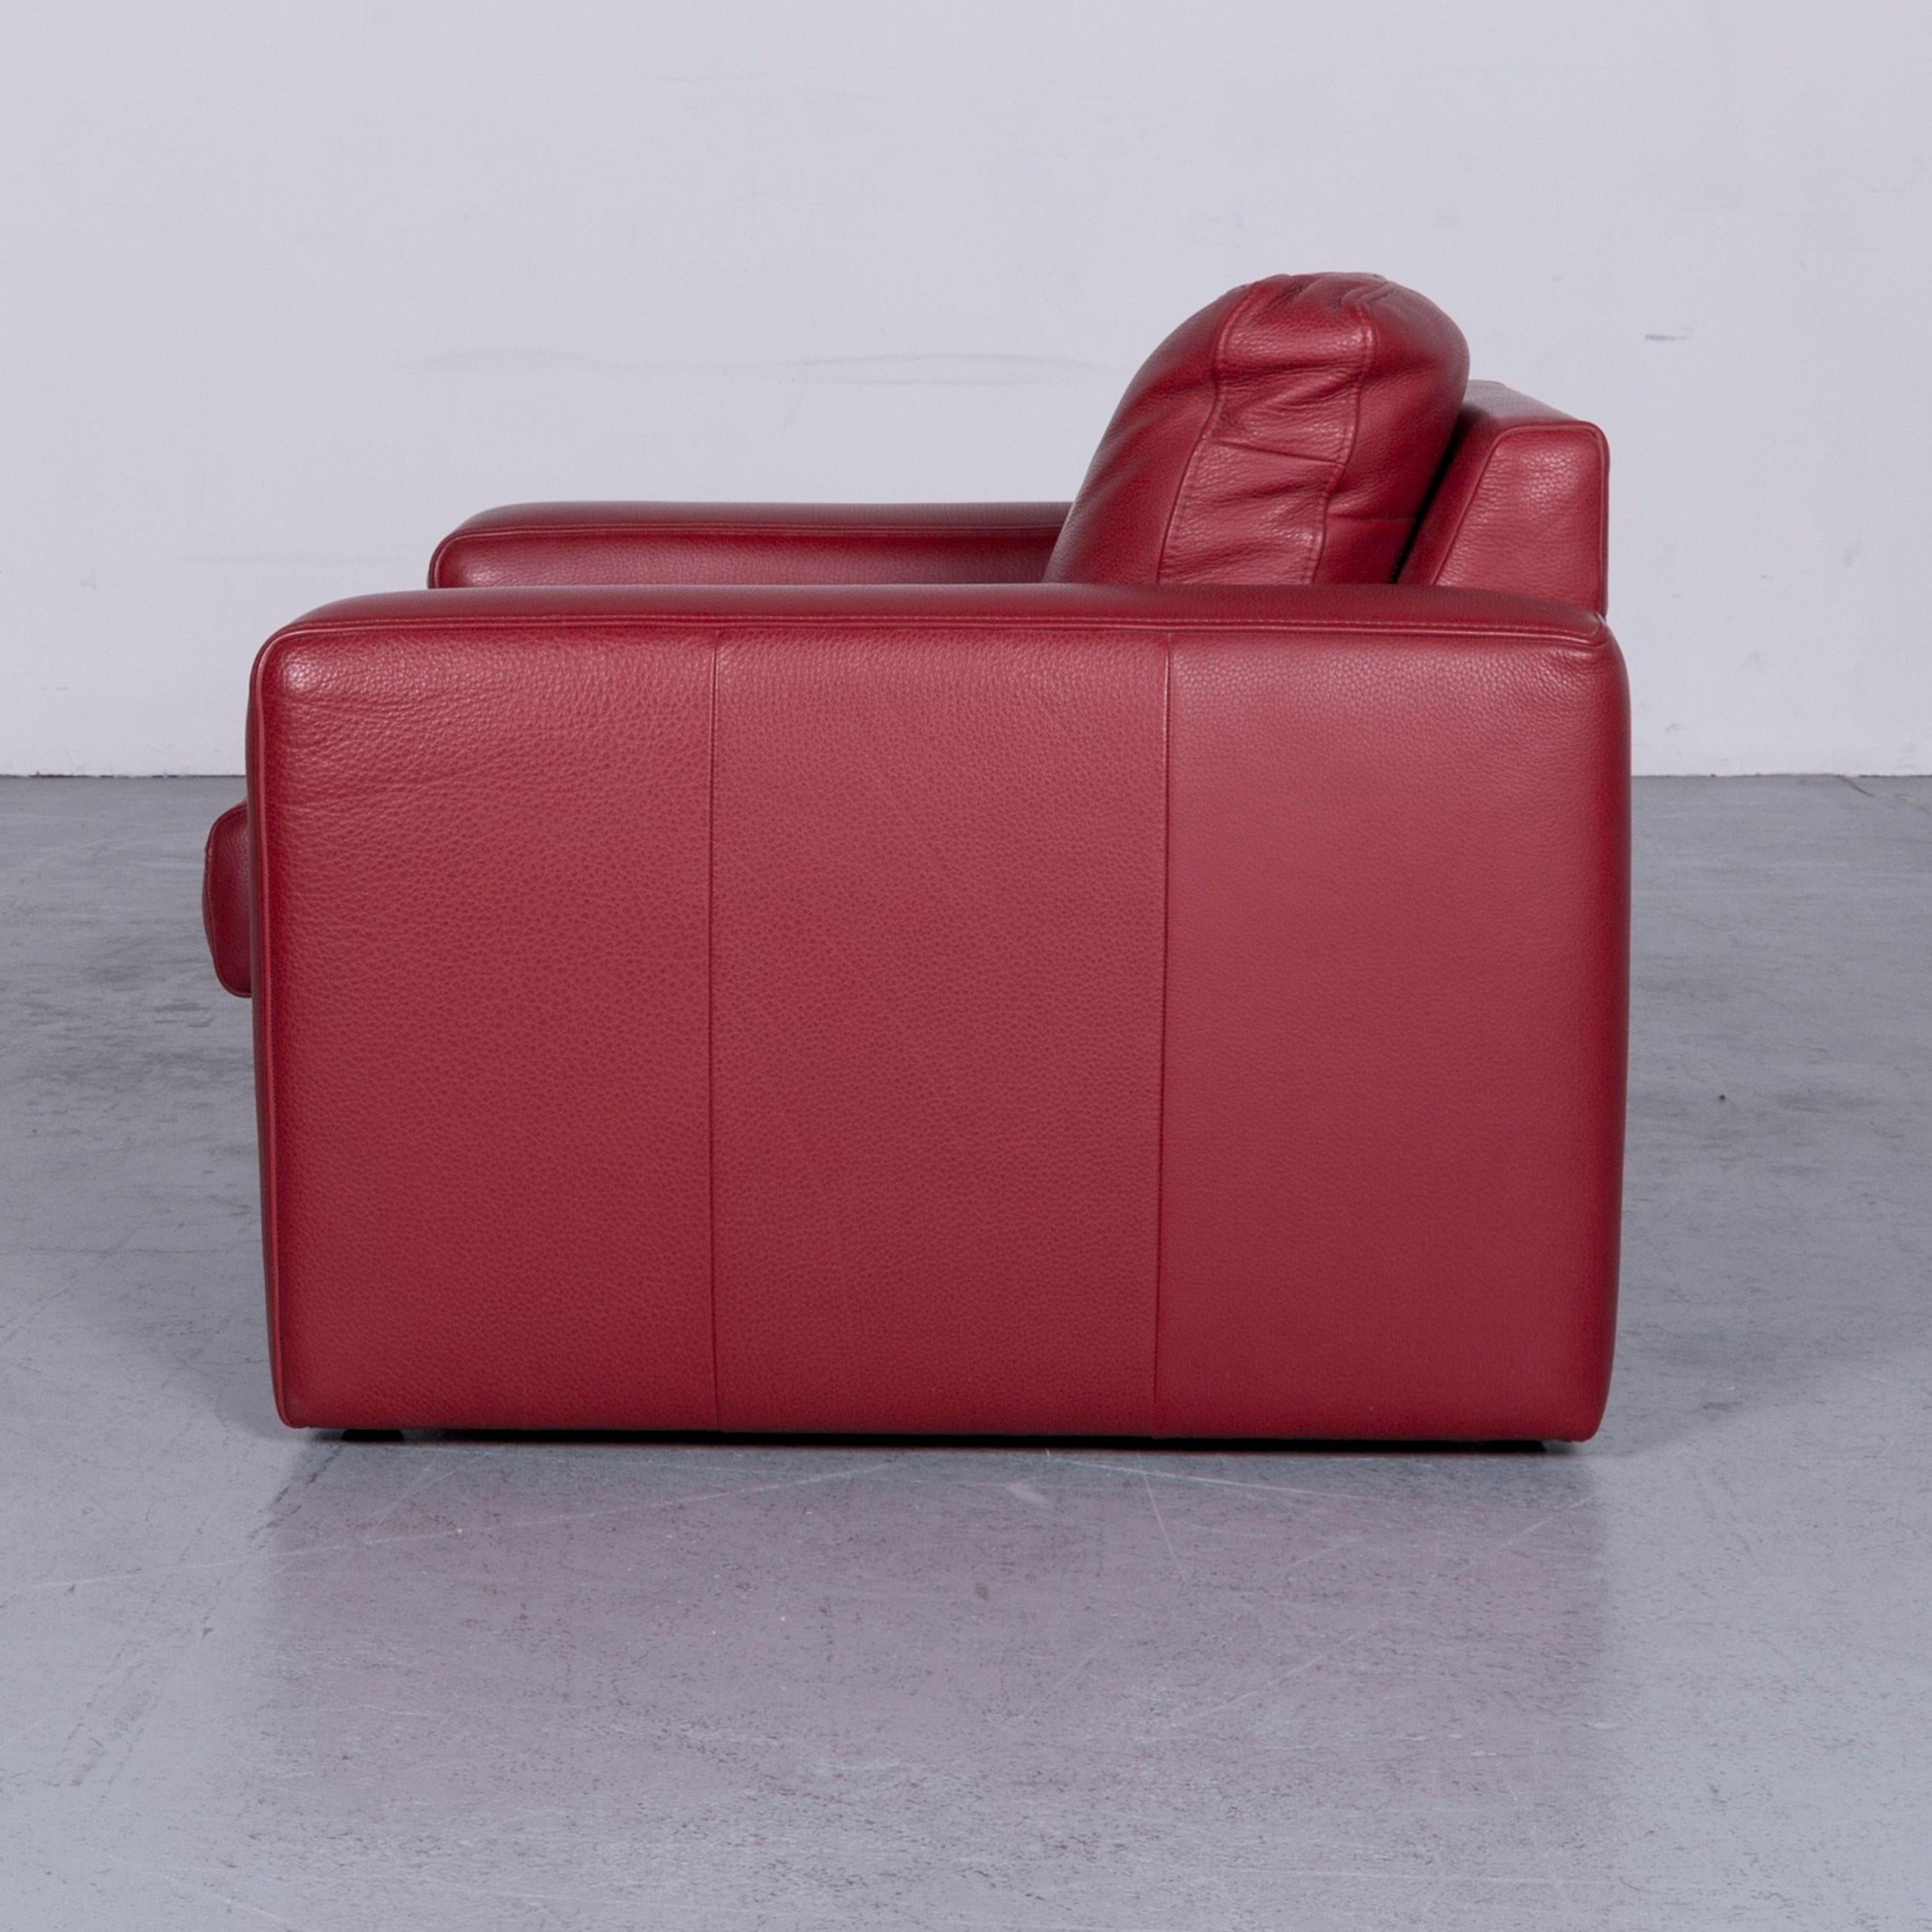 Contemporary Designer Leather Armchair Red One-Seat Chair Modern